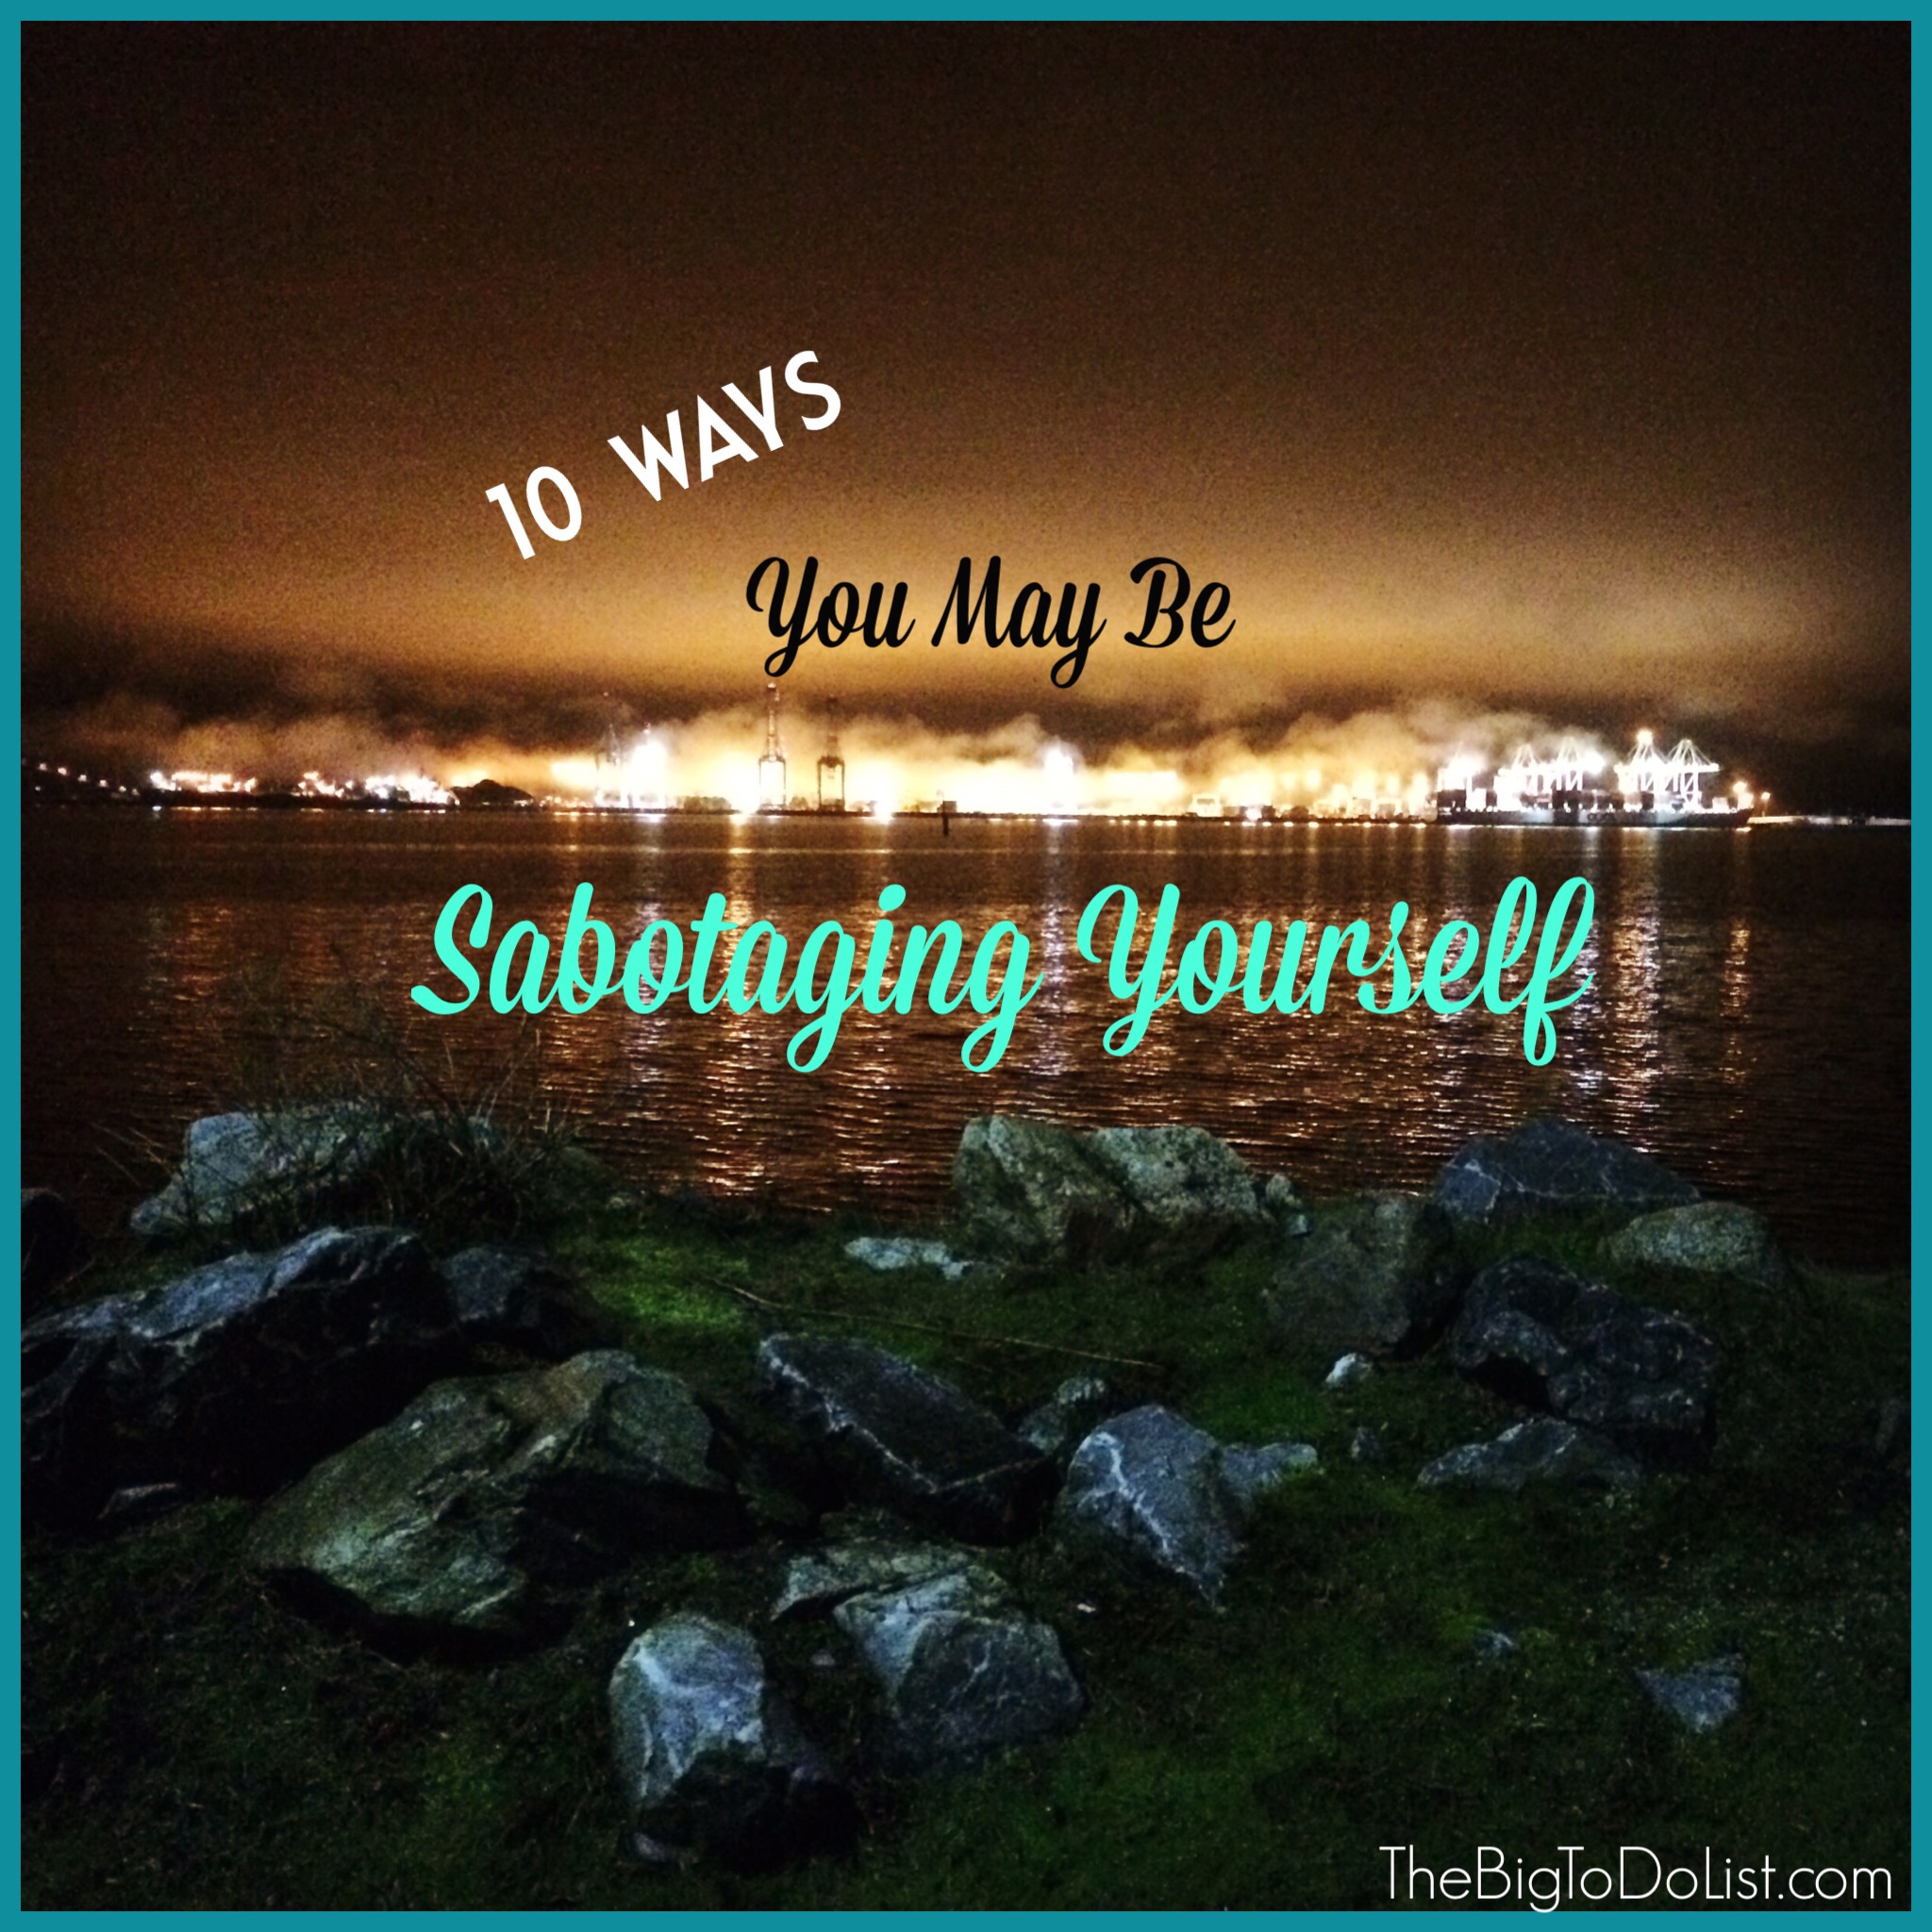 ways you may be sabotaging yourself